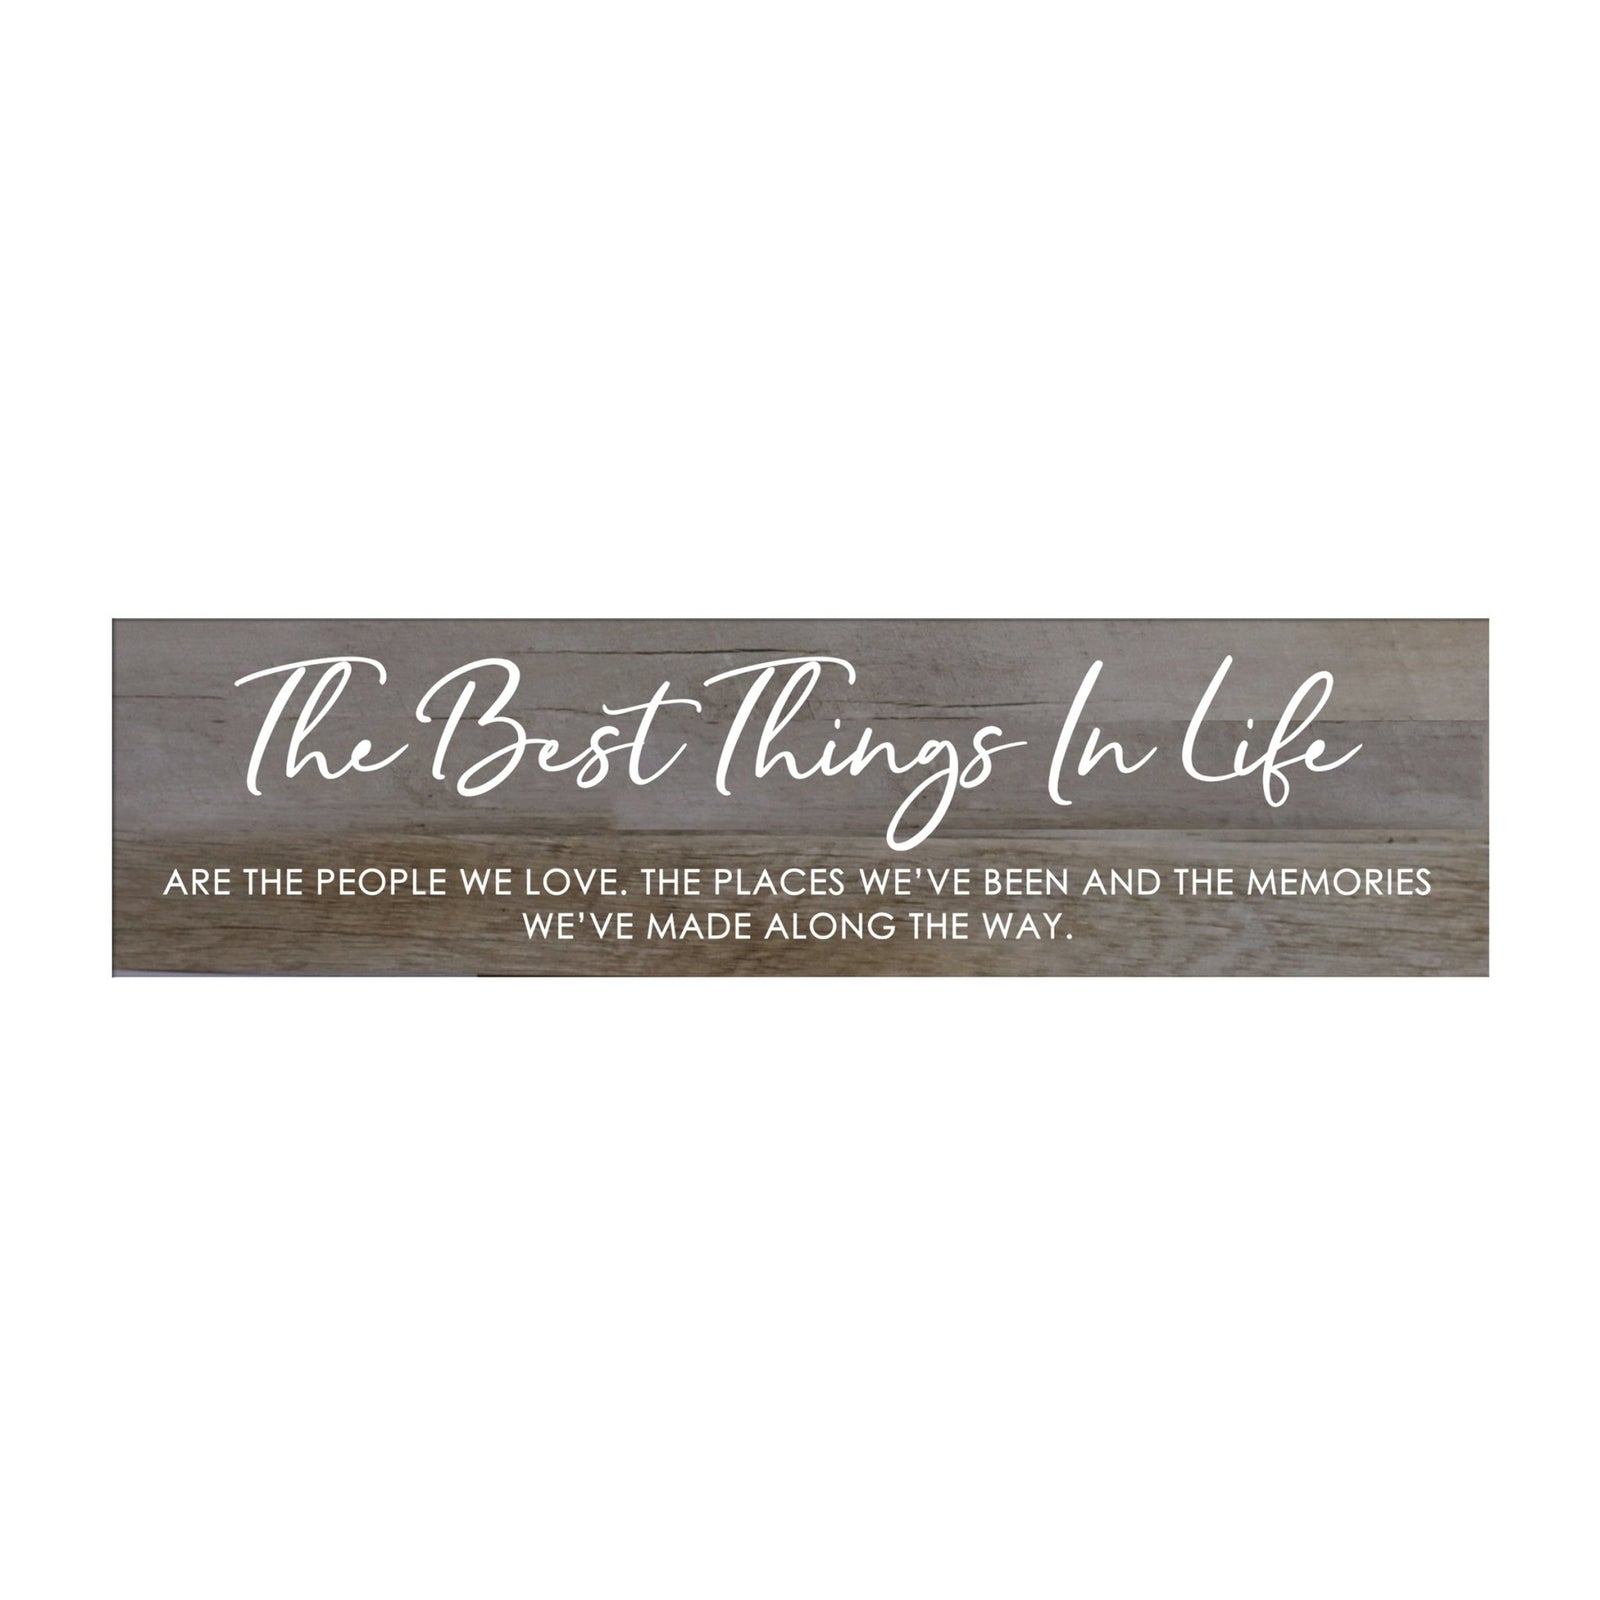 Inspirational Everyday Home and Family Wooden Wall Art Hanging Plaque 10 x 40 – The Best Things In Life - LifeSong Milestones